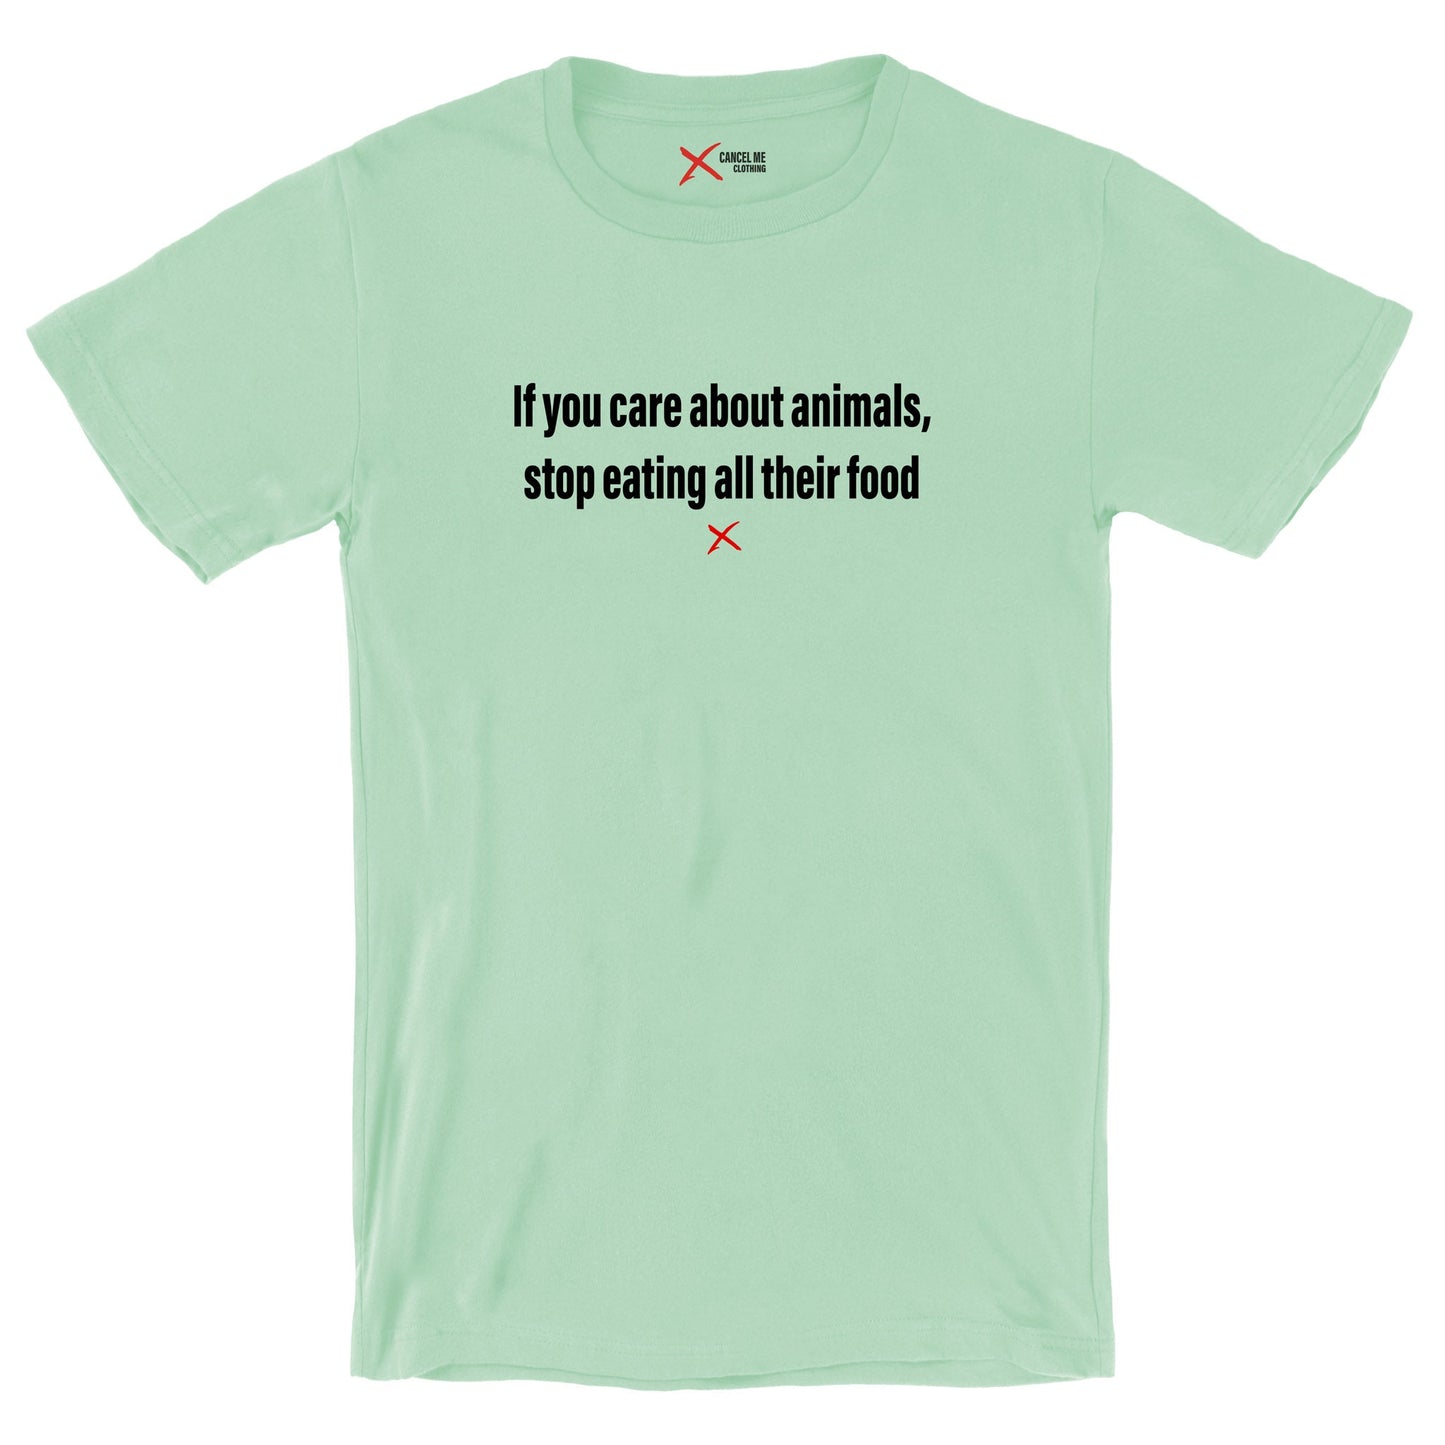 If you care about animals, stop eating all their food - Shirt